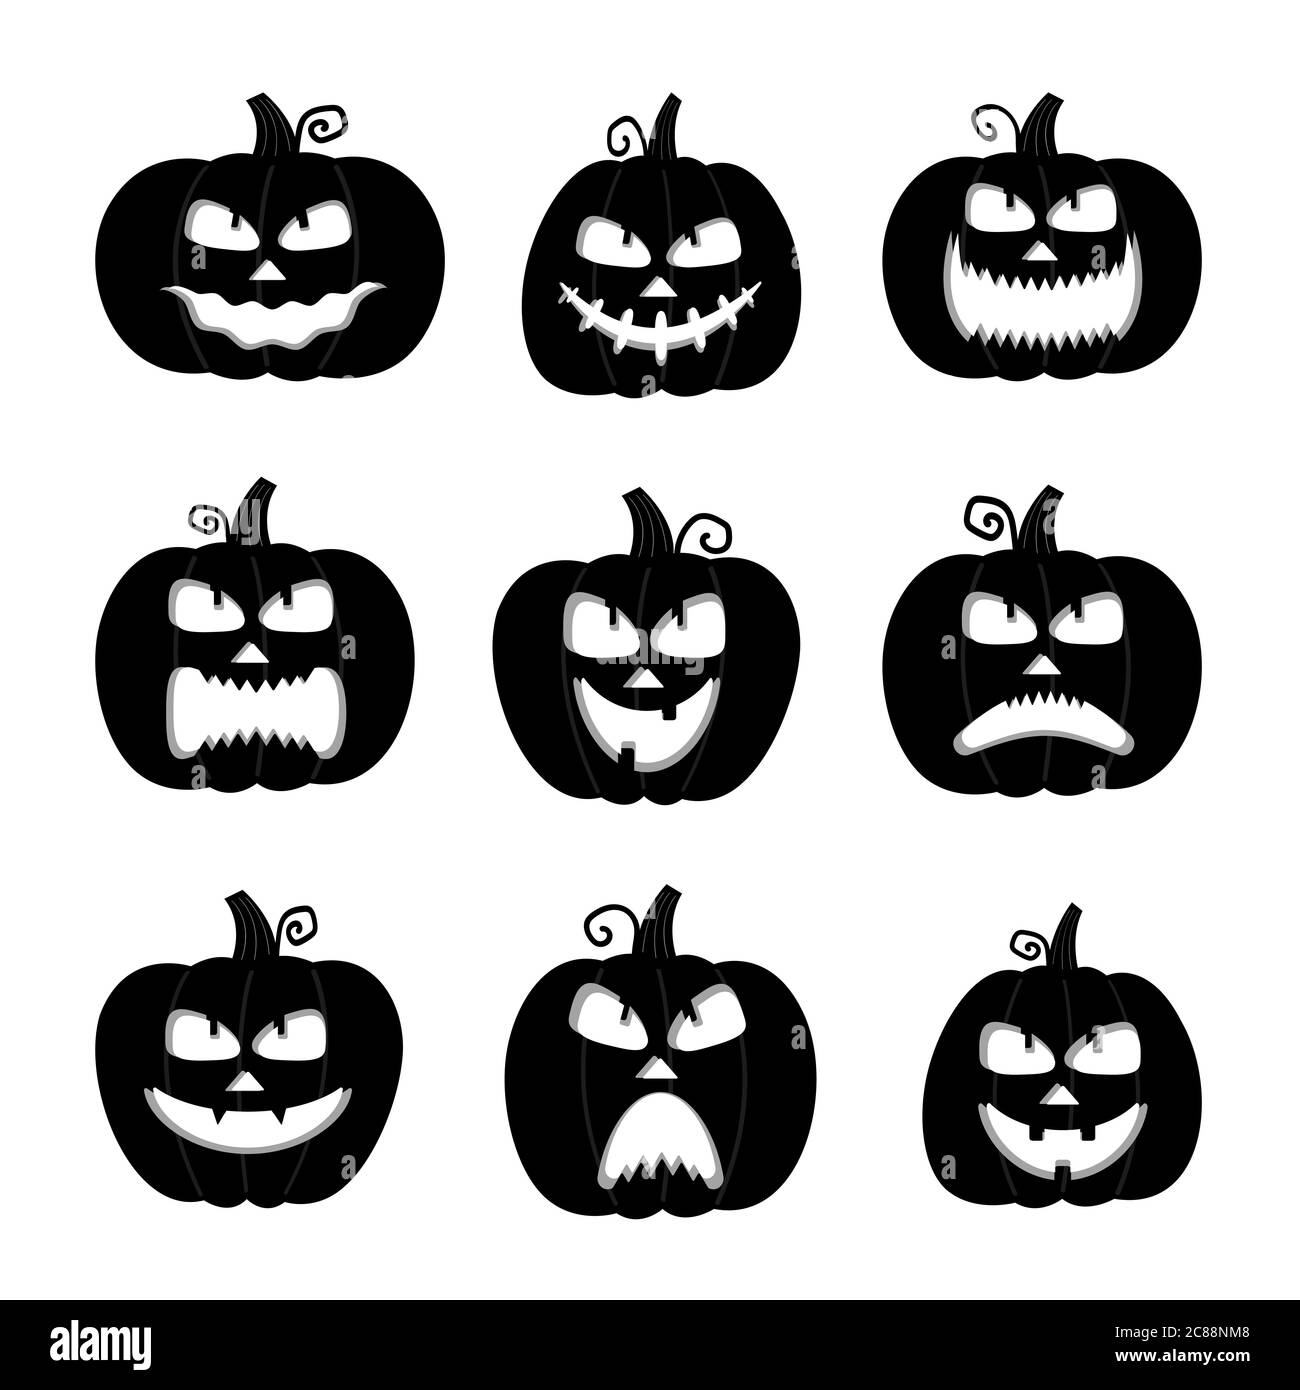 Happy, funny, cute and scary halloween pumpkin set. Holidays cartoon character collection. Vector illustration in flat style. Stock Vector